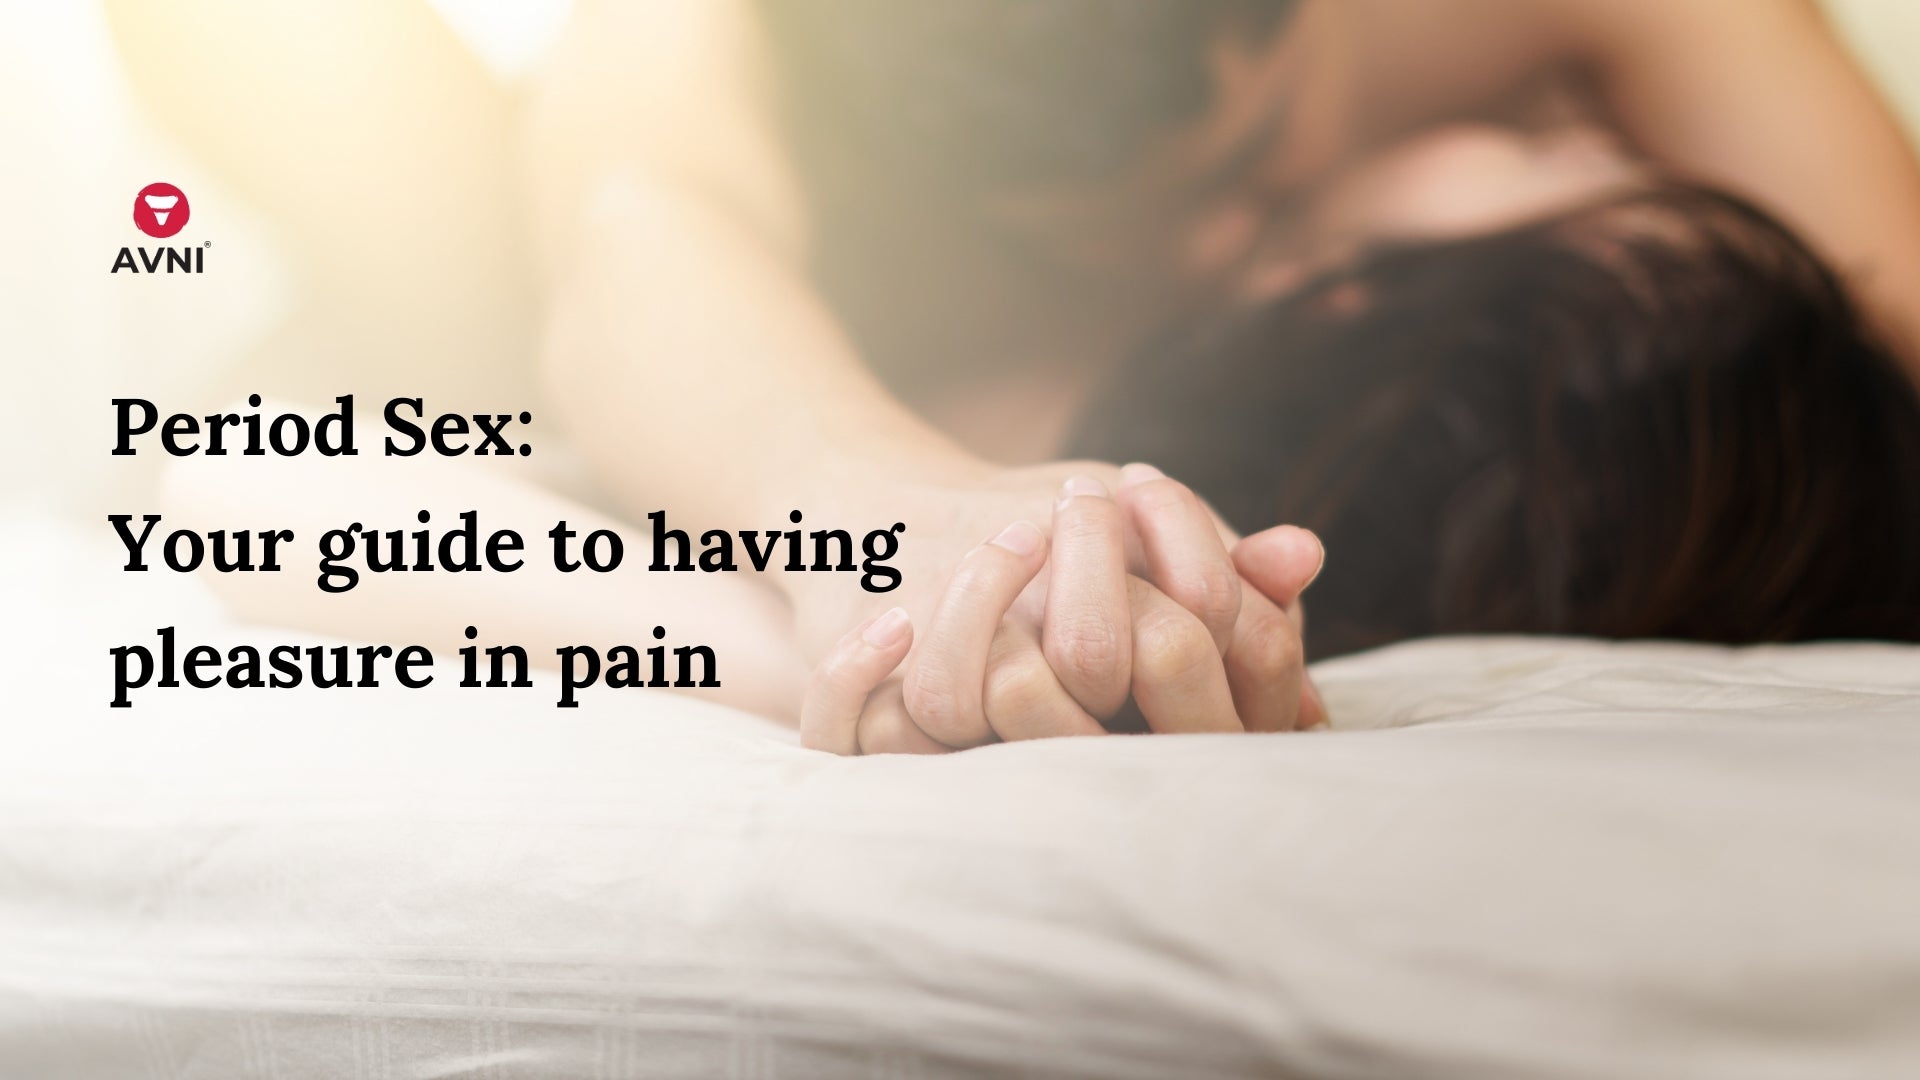 Period Sex: Your guide to having pleasure in pain